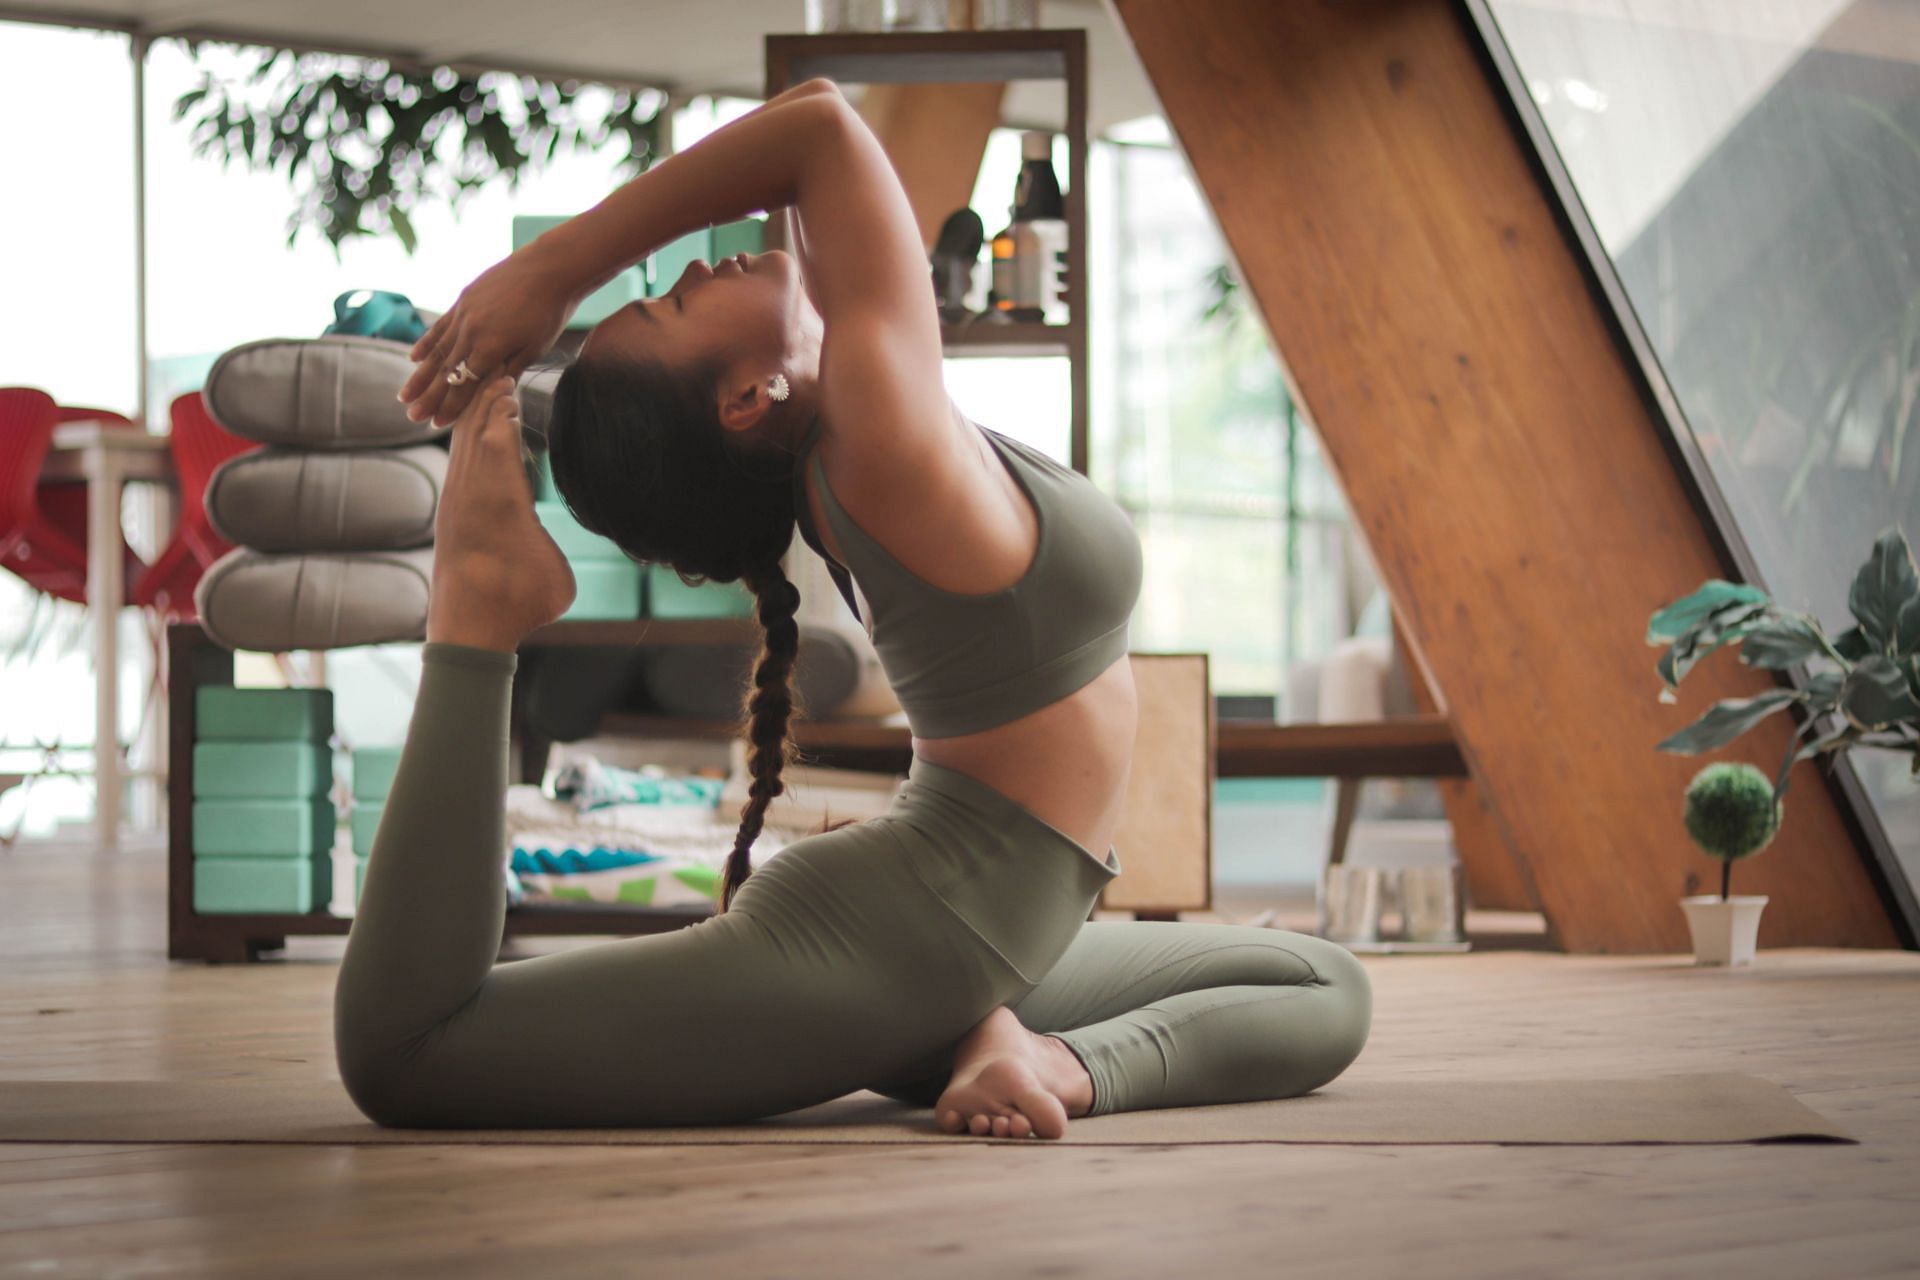 Try these yoga poses to relieve stress! (Image via unsplash/Carl Barcelo)